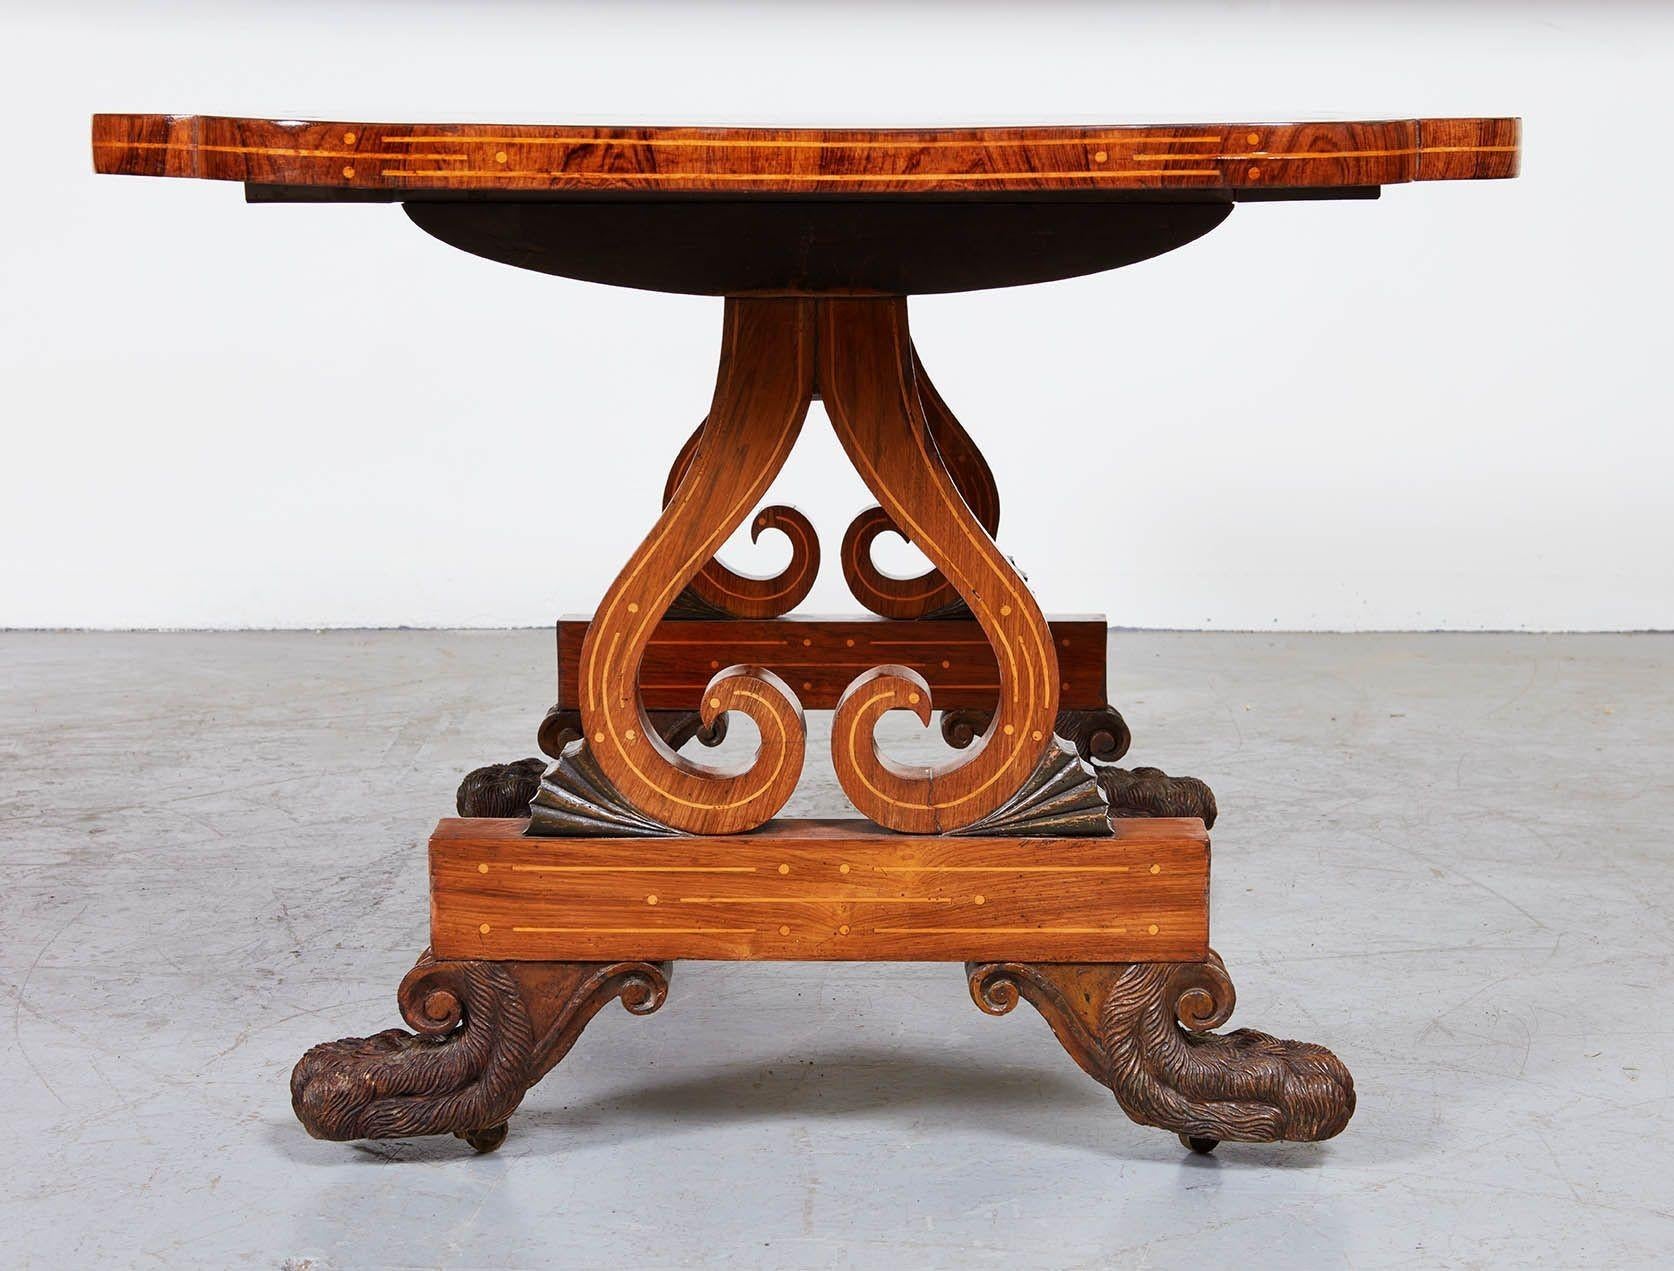 Fine Regency period rosewood library or writing table, the lobed top with satinwood banding and inlaid edge, over lyre base similarly inlaid and standing on boldly carved hairy lion paw feet, in the manner of George Oakley. Rich timber and